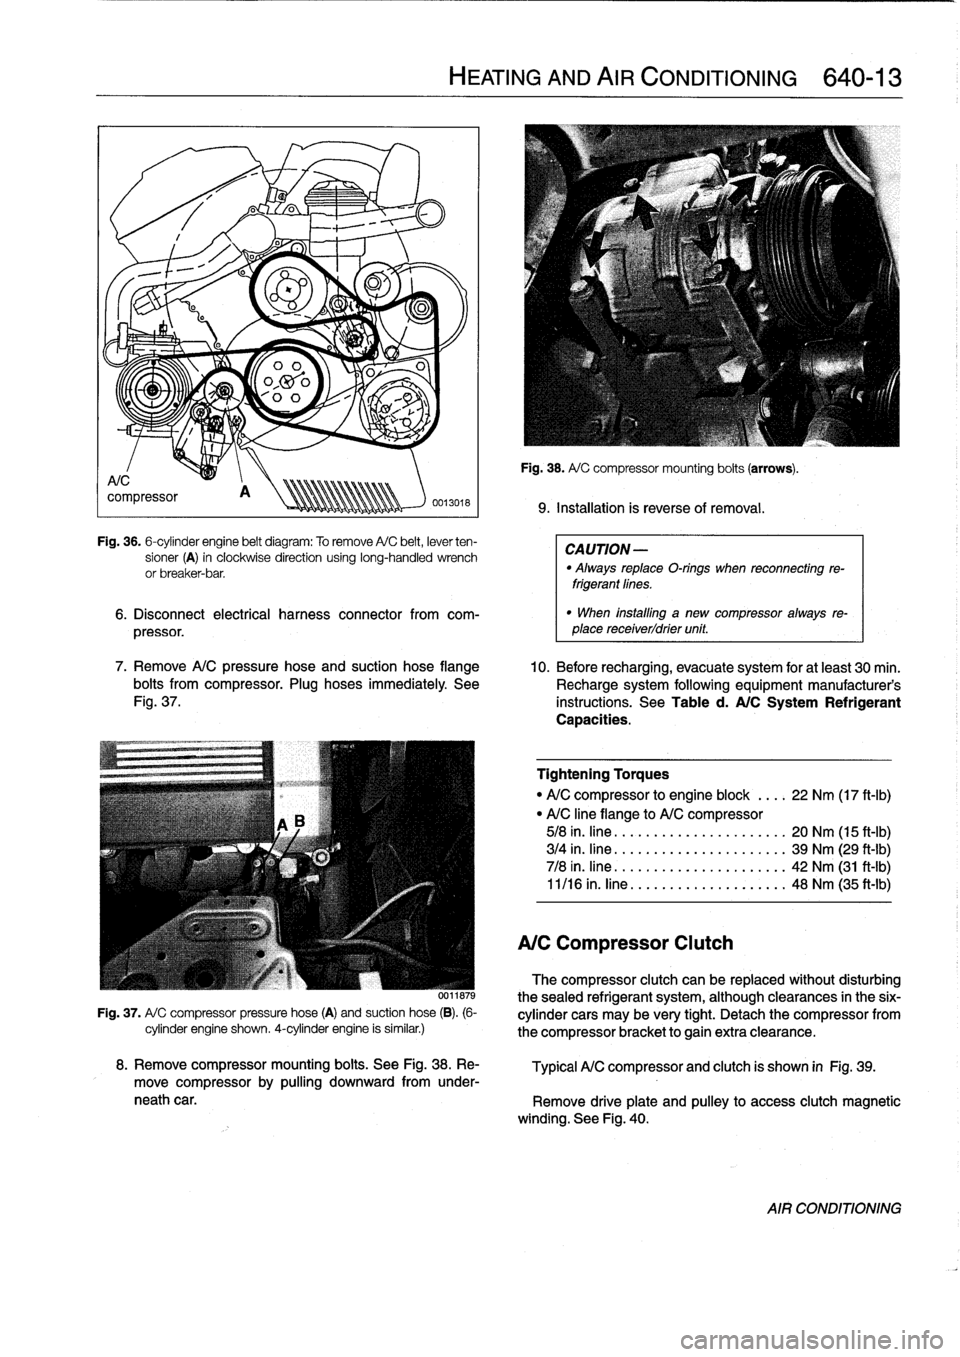 BMW 328i 1998 E36 Owners Manual 
Fig
.
36
.
6-cylinder
engine
belt
diagram
:
To
remove
A/C
belt,
lever
ten-
sioner
(A)
in
clockwise
direction
using
long-handled
wrench
or
breaker-bar
.

6
.
Disconnect
electrical
harness
connector
fr